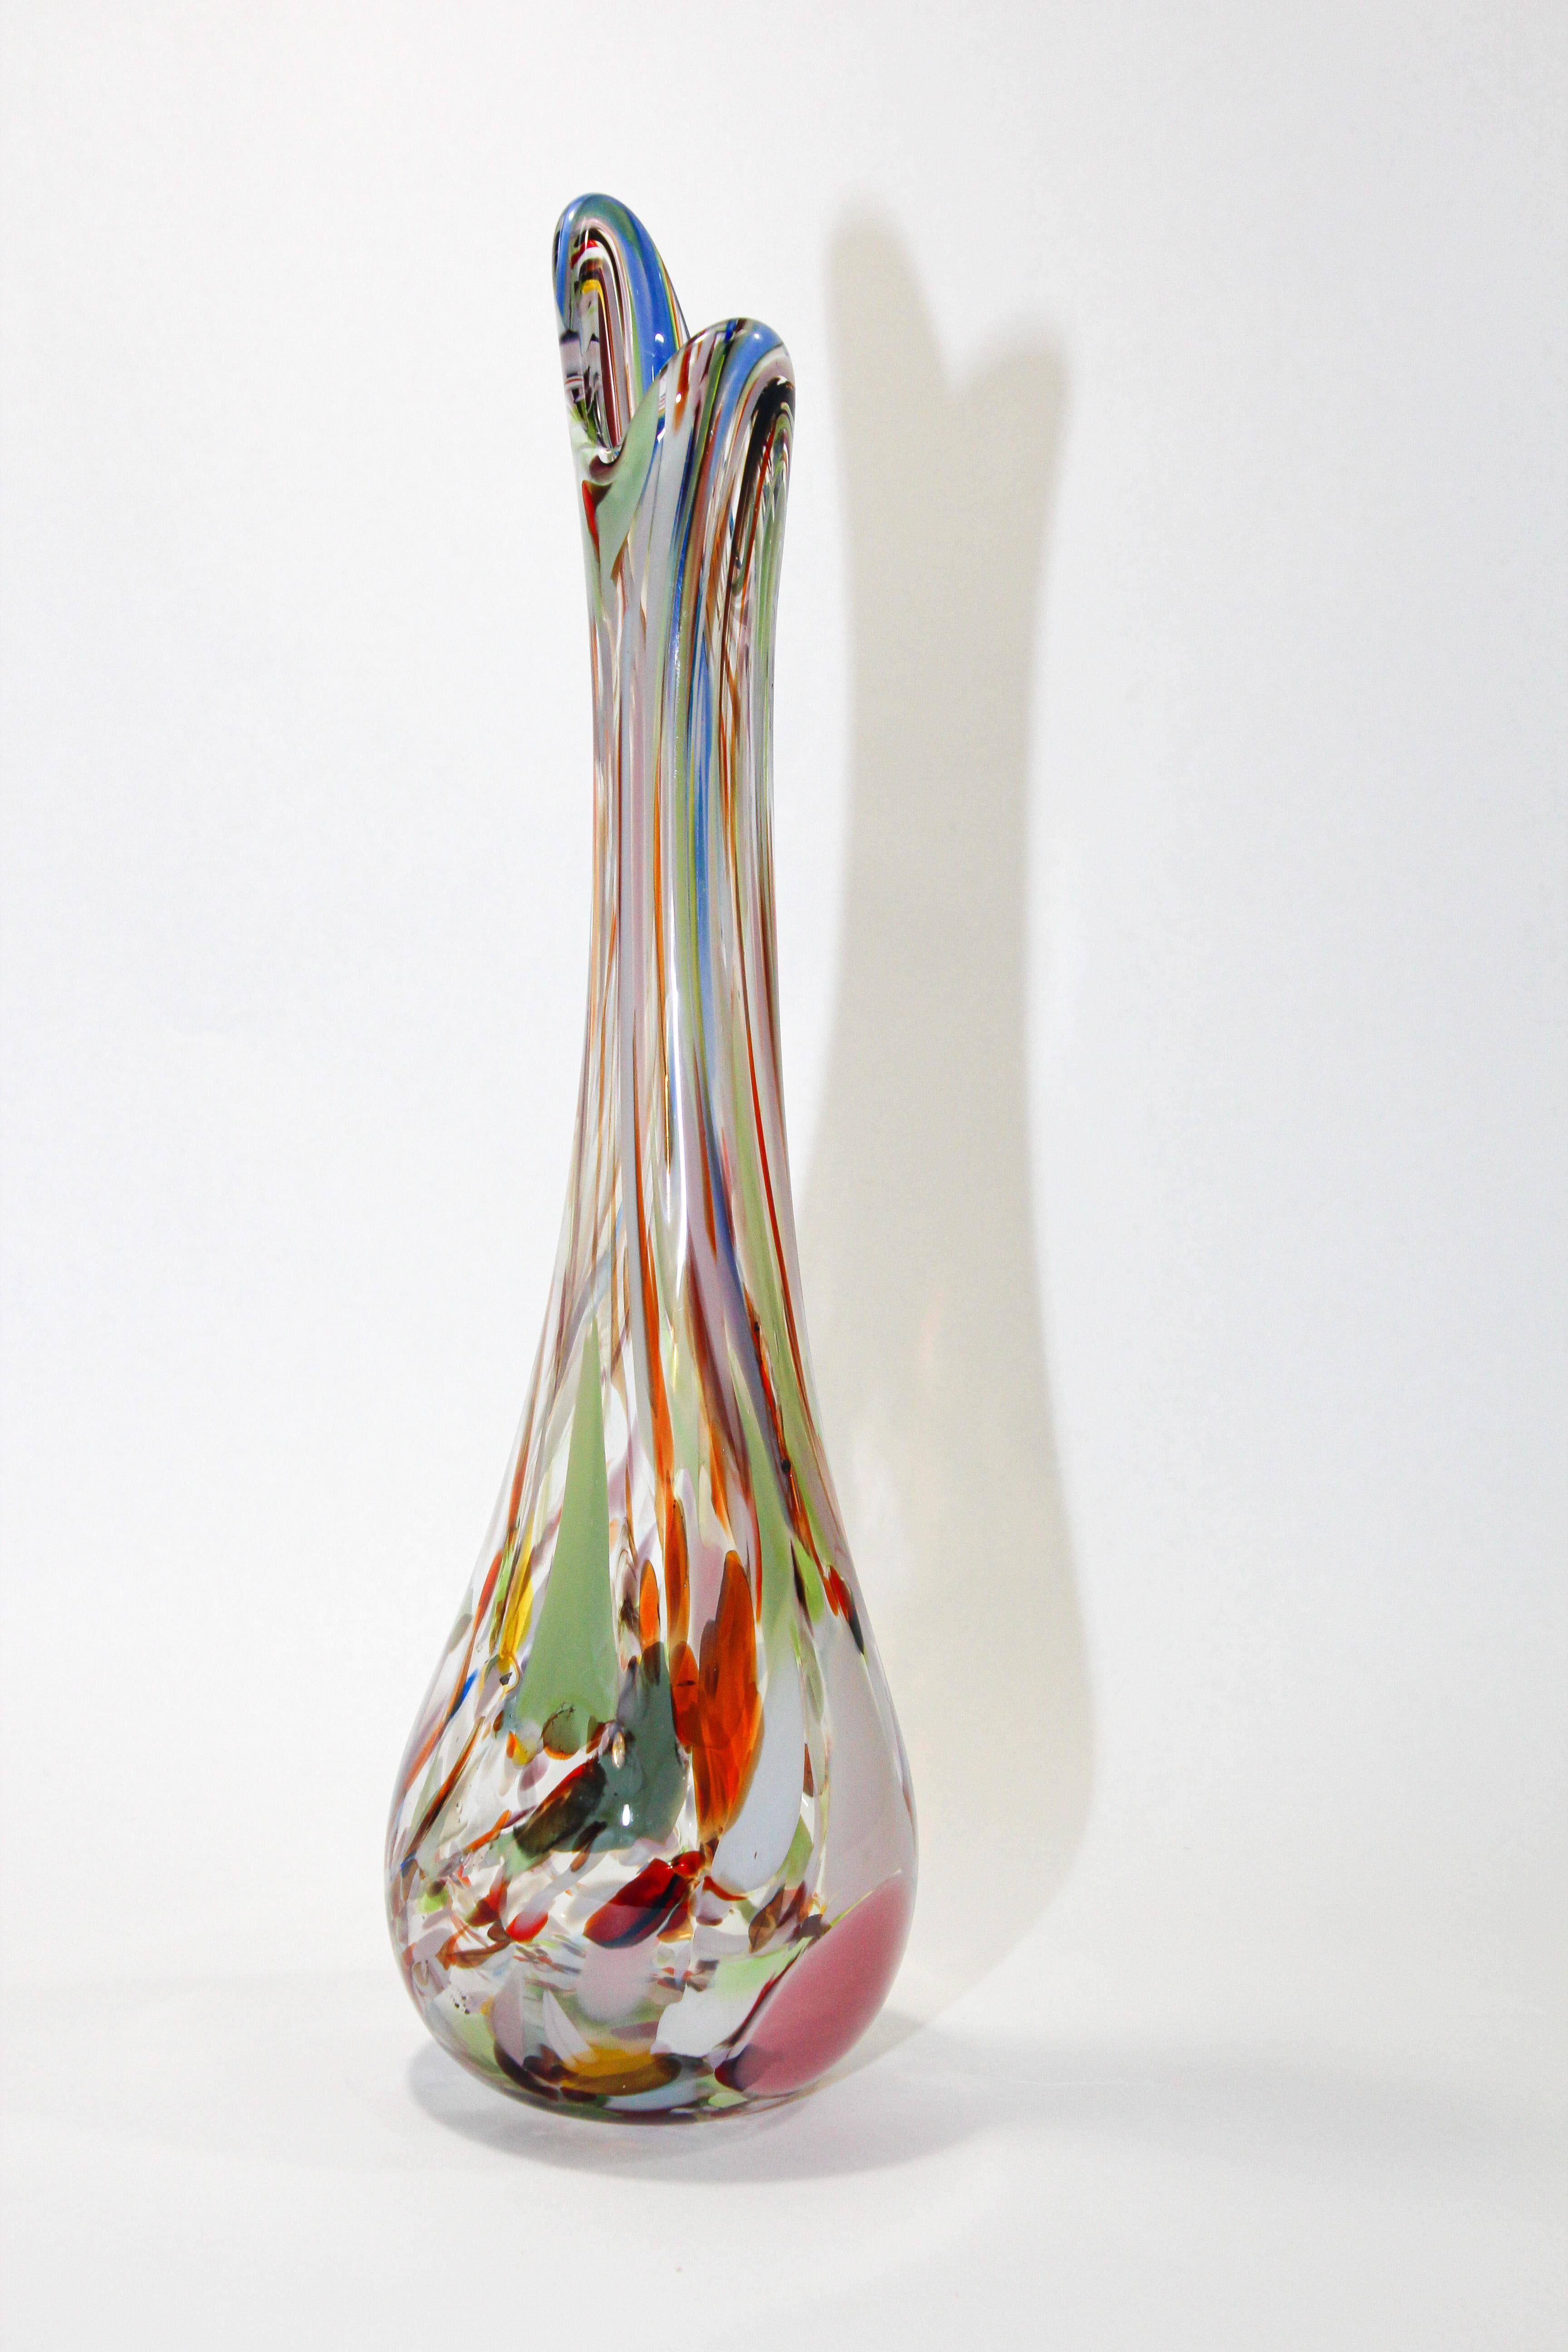 Vintage Murano Venetian handblown art glass vase in multicolored hues.
Hand-made with the technique of glass blowing and Murrina decoration. 
A beautiful organic elegant vase with an interesting original shape, Classic Venetian Murano style